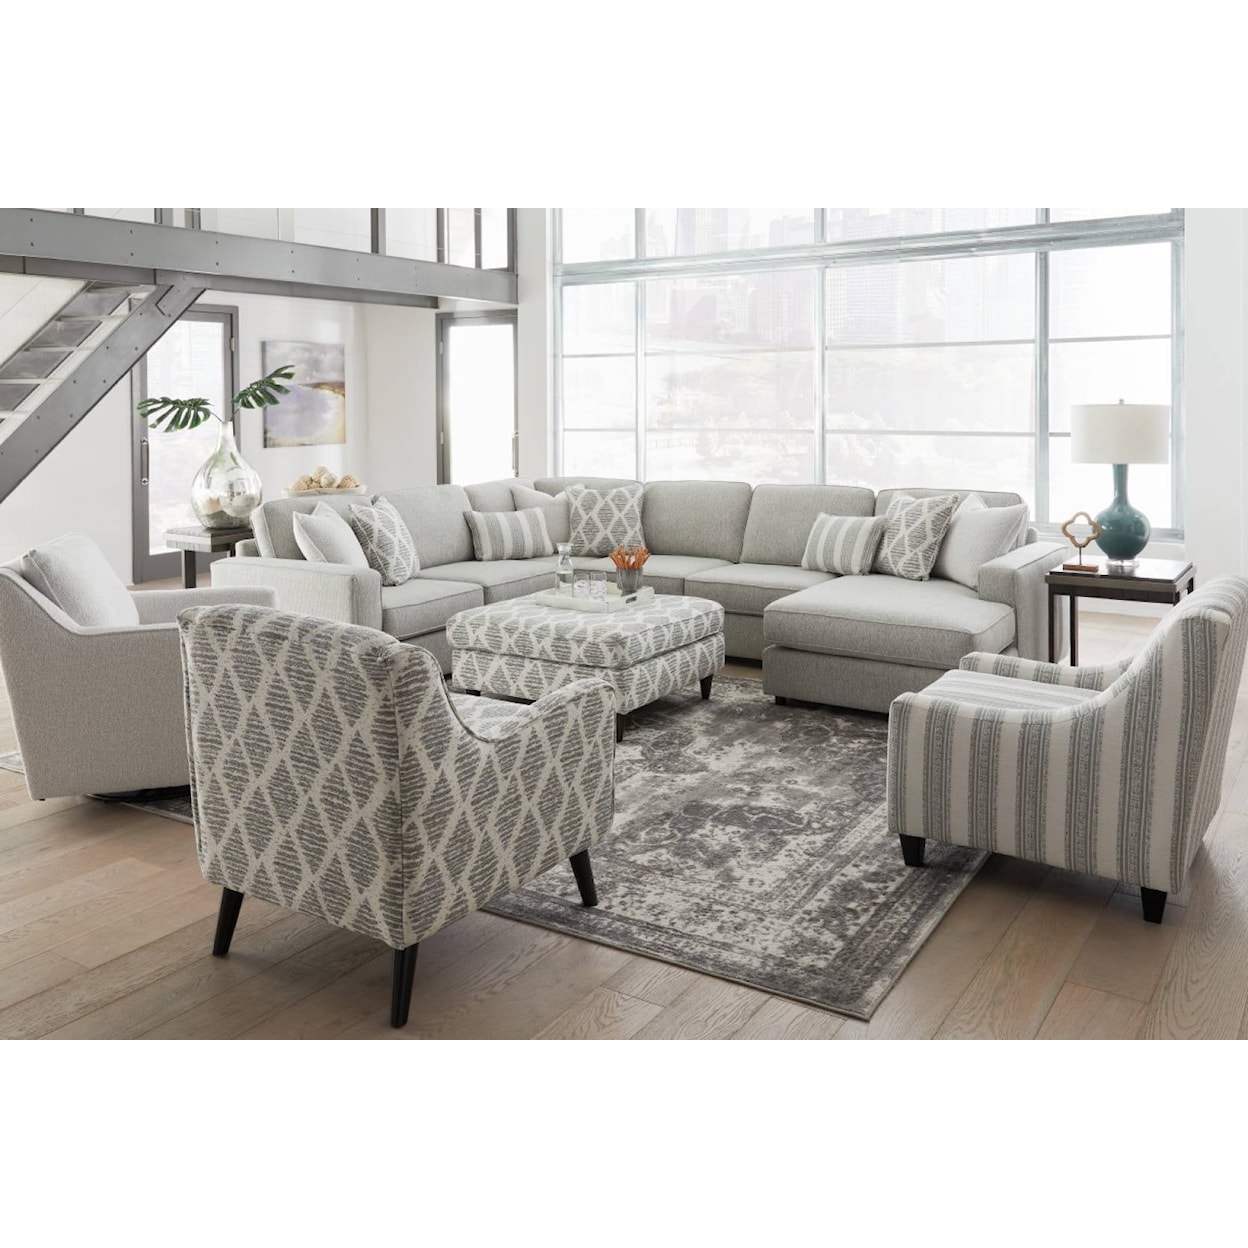 VFM Signature 2061 DURANGO FOAM Sectional with Right Chaise